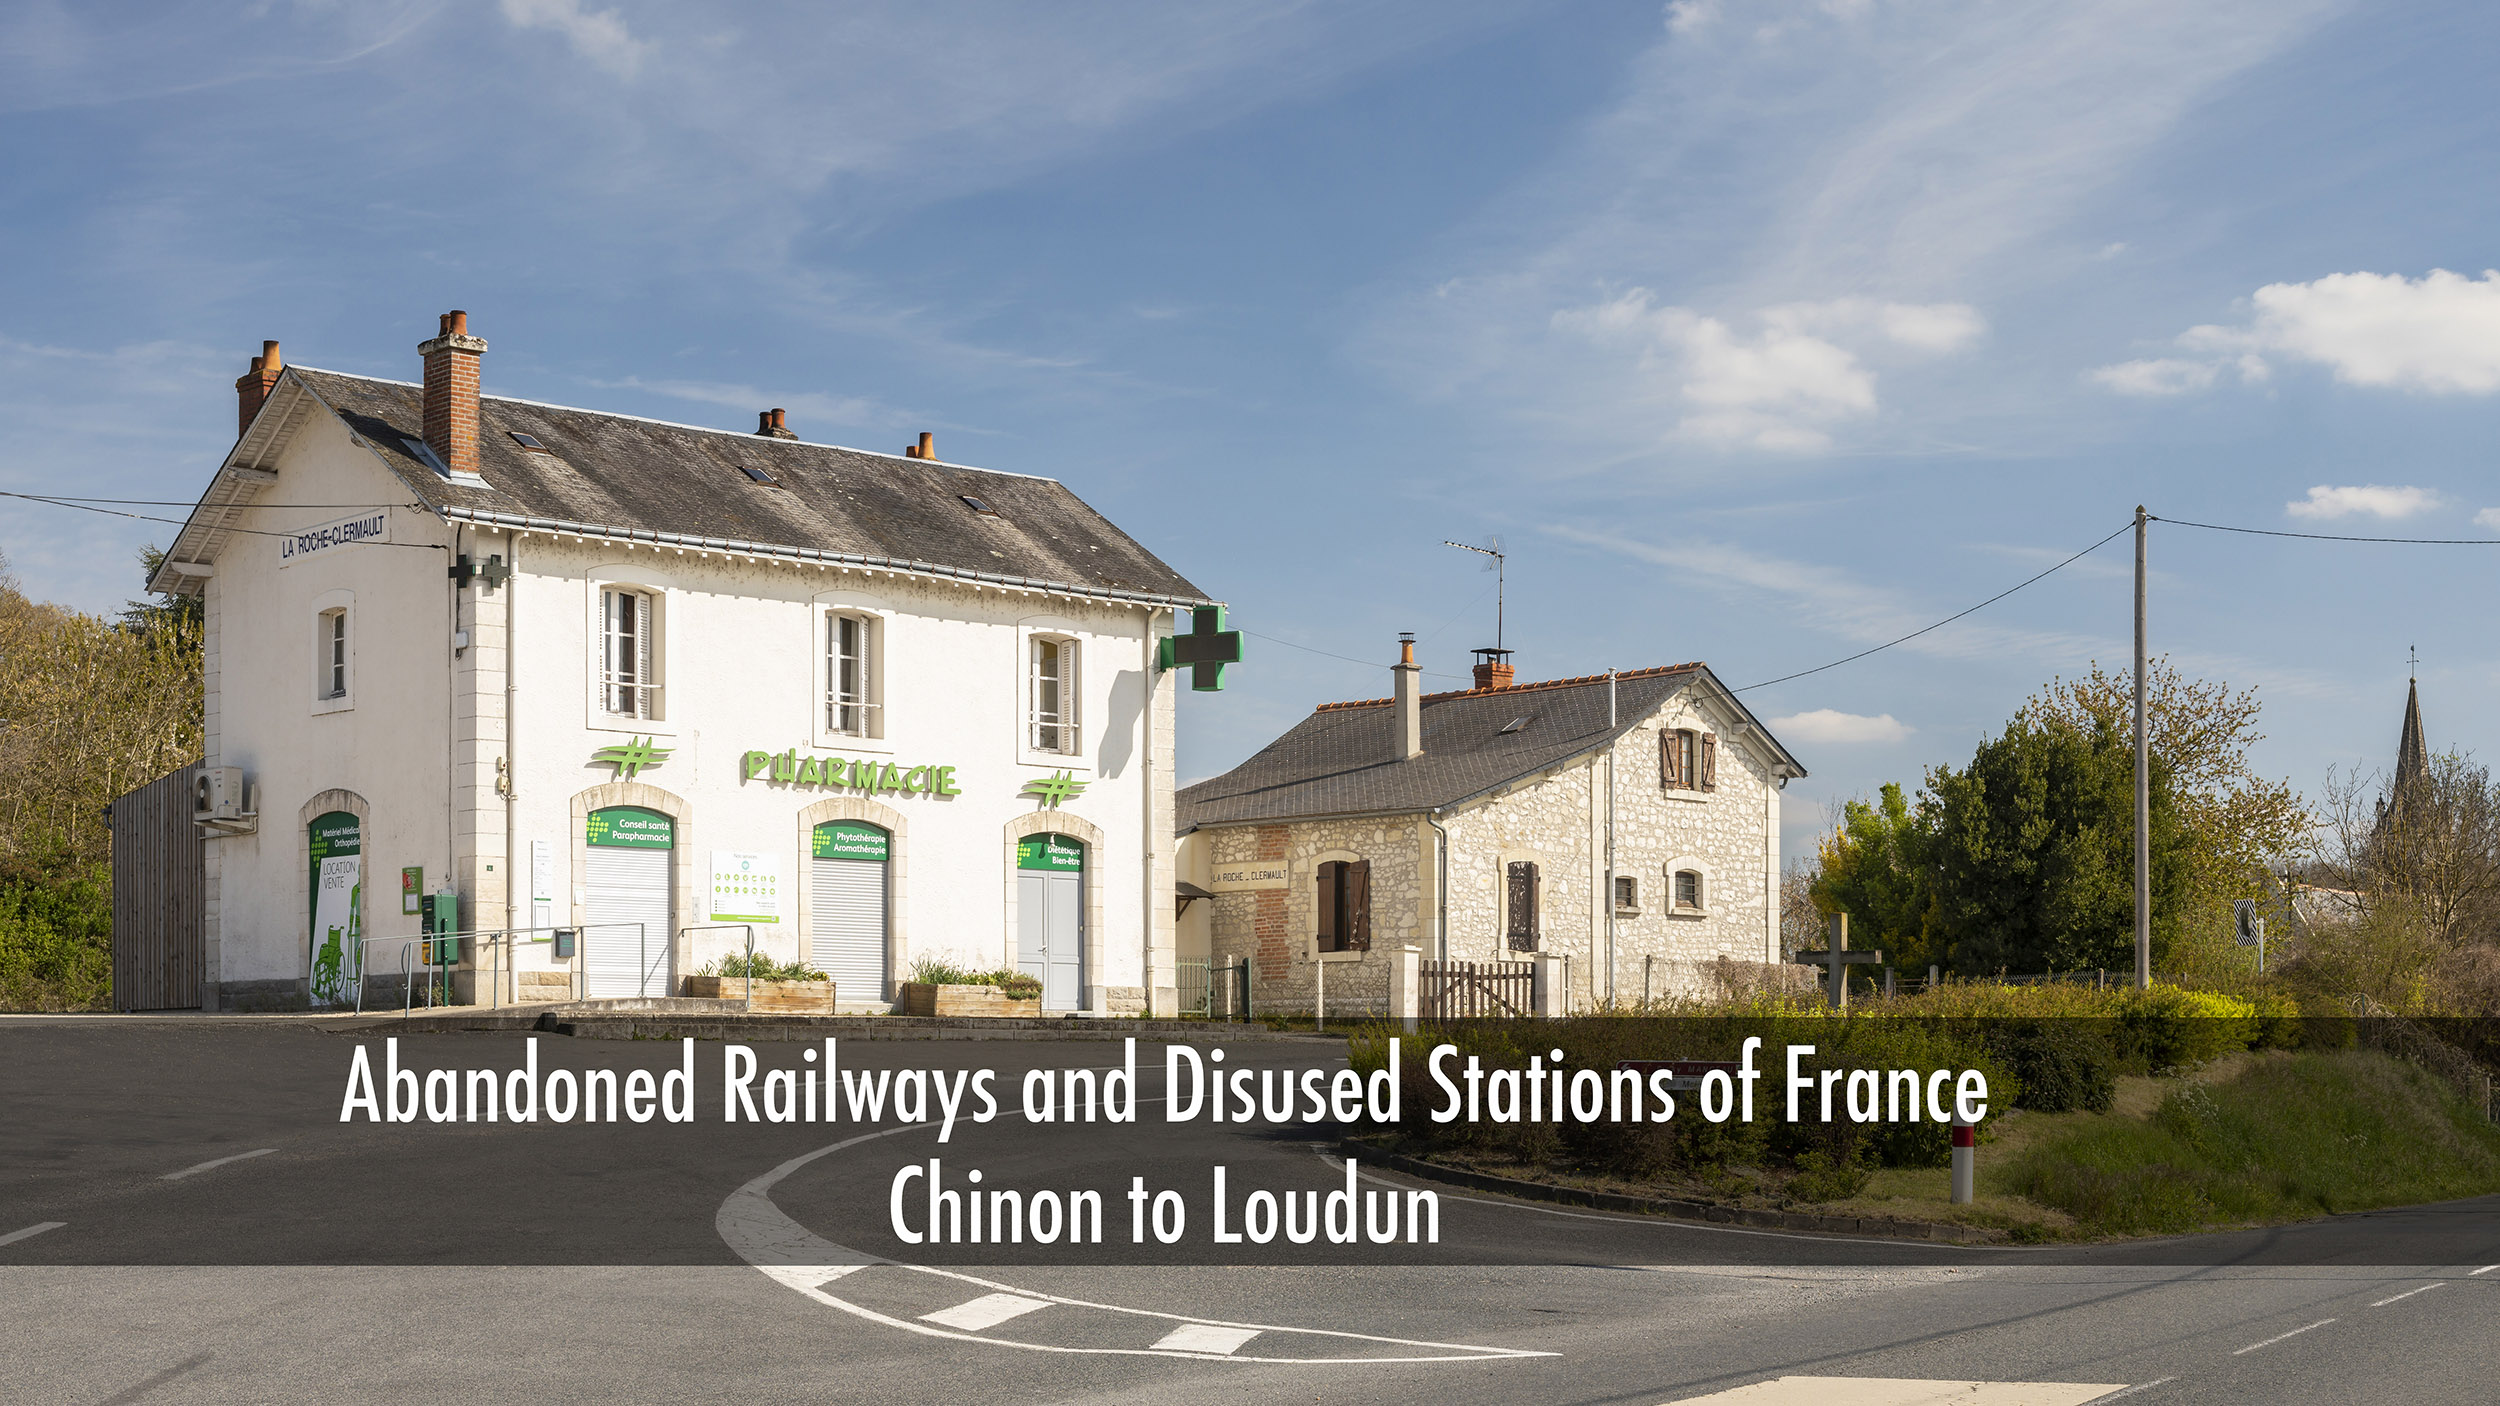 Abandoned railways and disused stations of france. Chinon to Loudun.